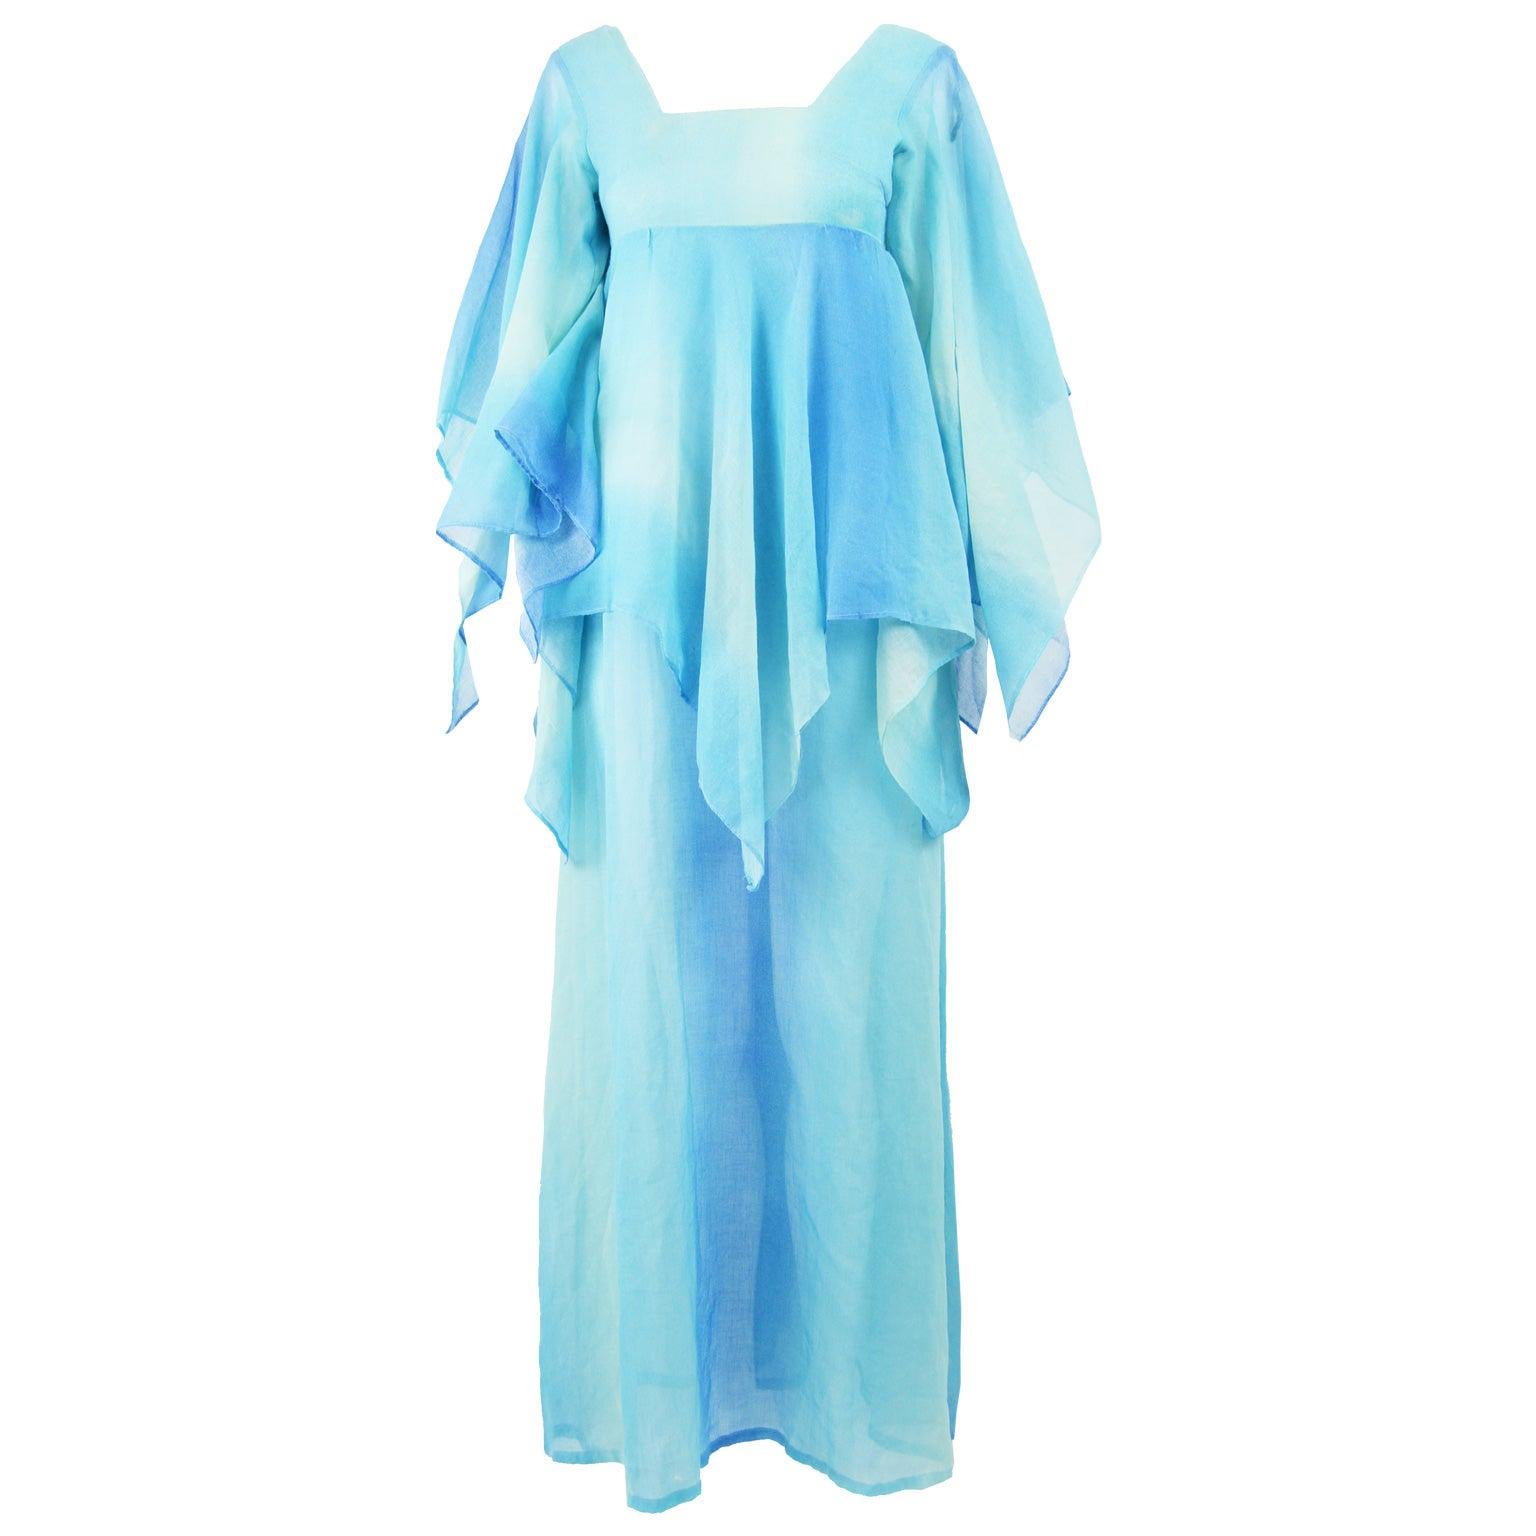 London Mob of Carnaby Street 1970s Blue Ombre Cotton Voile Vintage Maxi Dress